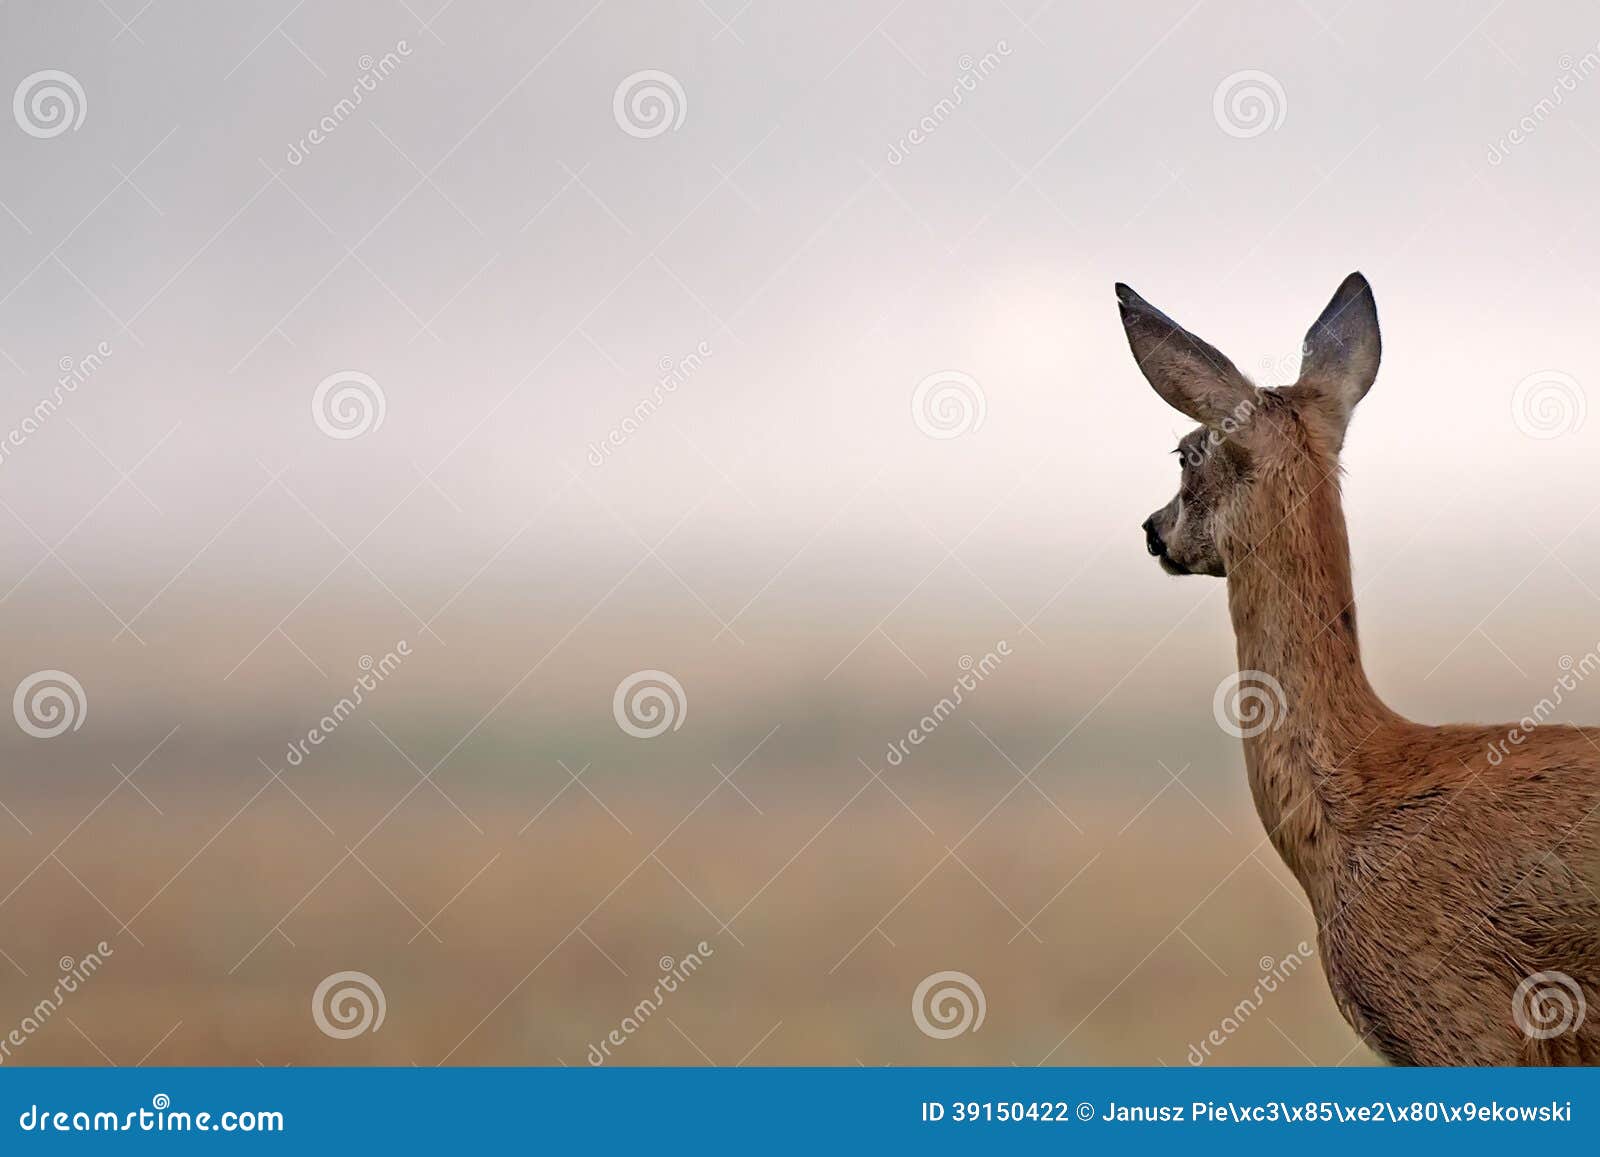 Roe-deer Looking at Something in the Distance Stock Photo - Image of mist,  wildlife: 39150422